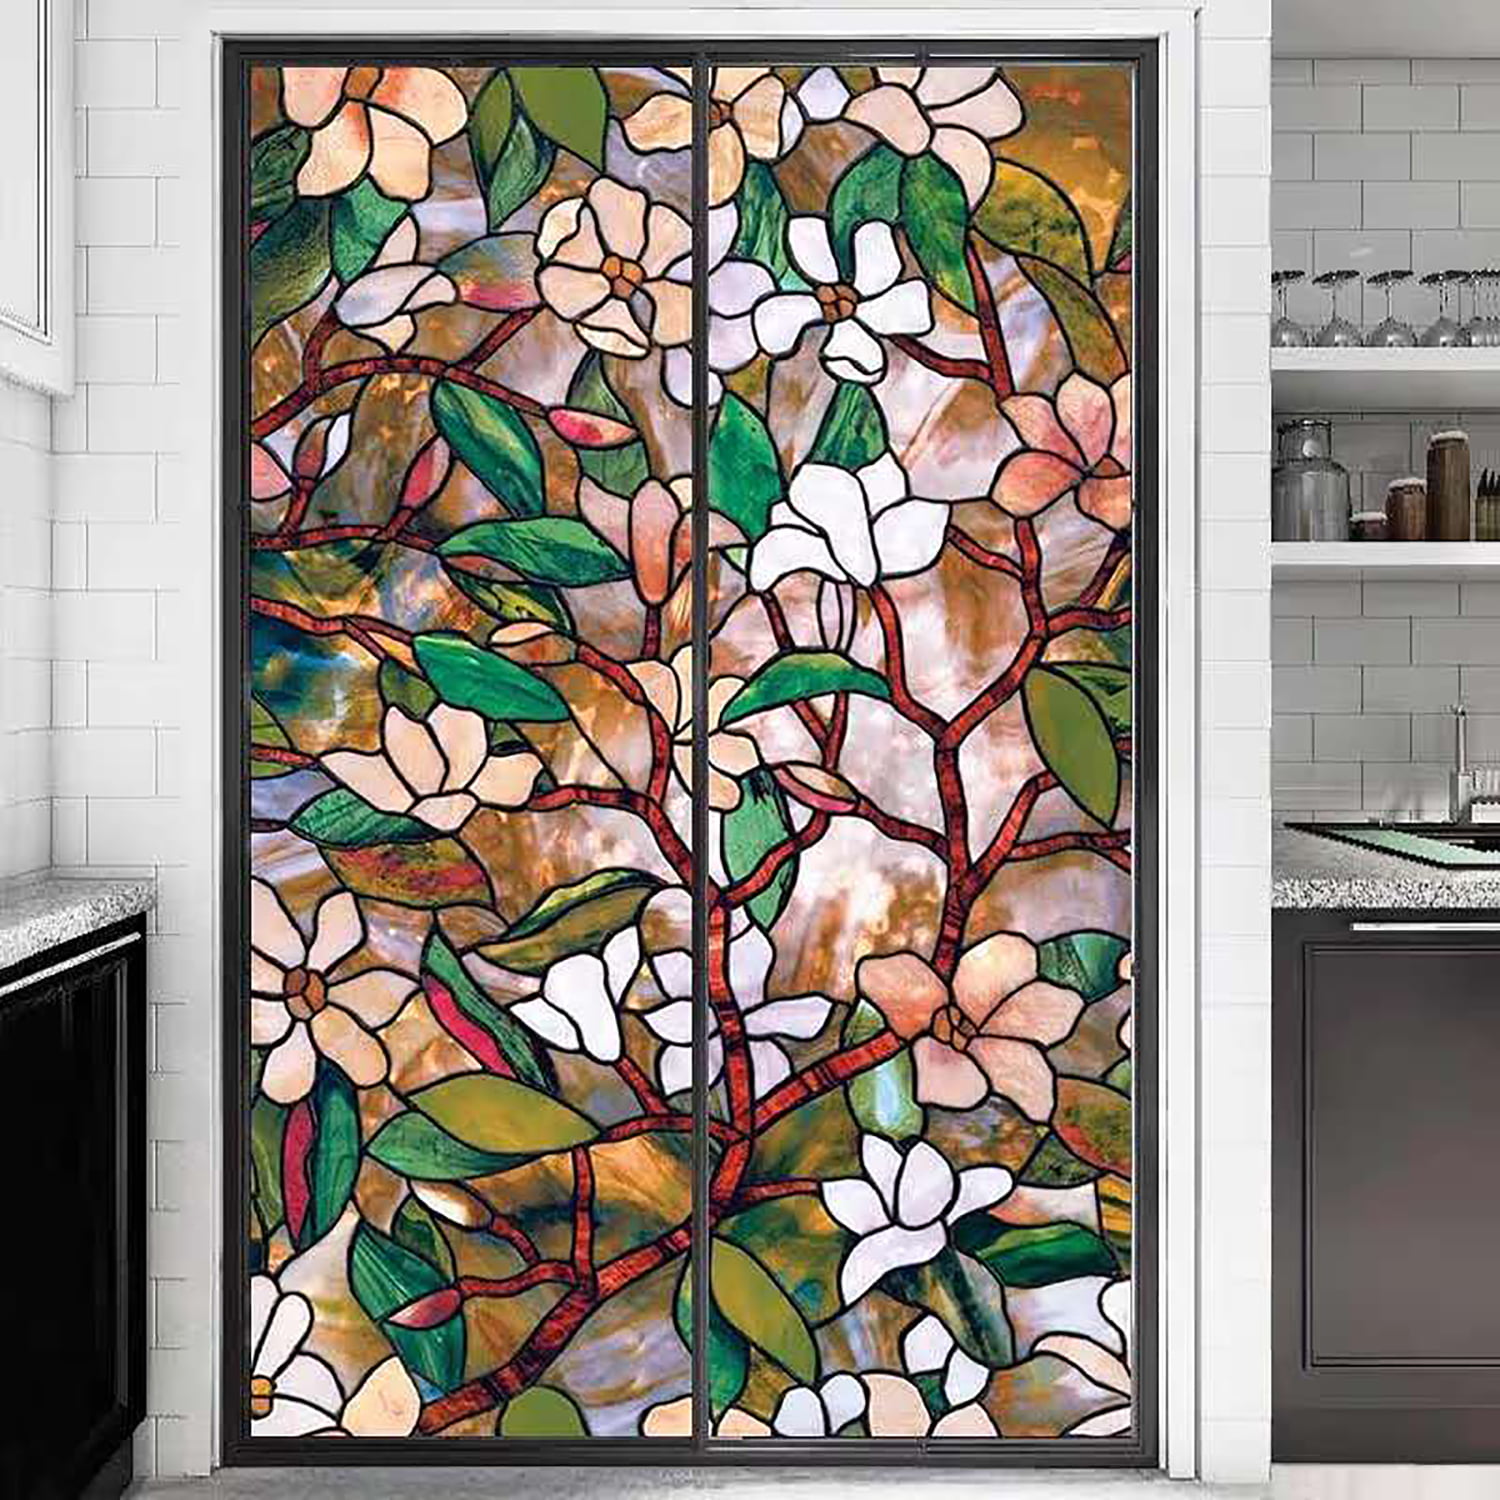 78.7" Frosted Stained 3D Glass Sticker Window Film Vinyl Decorative Static Cling 